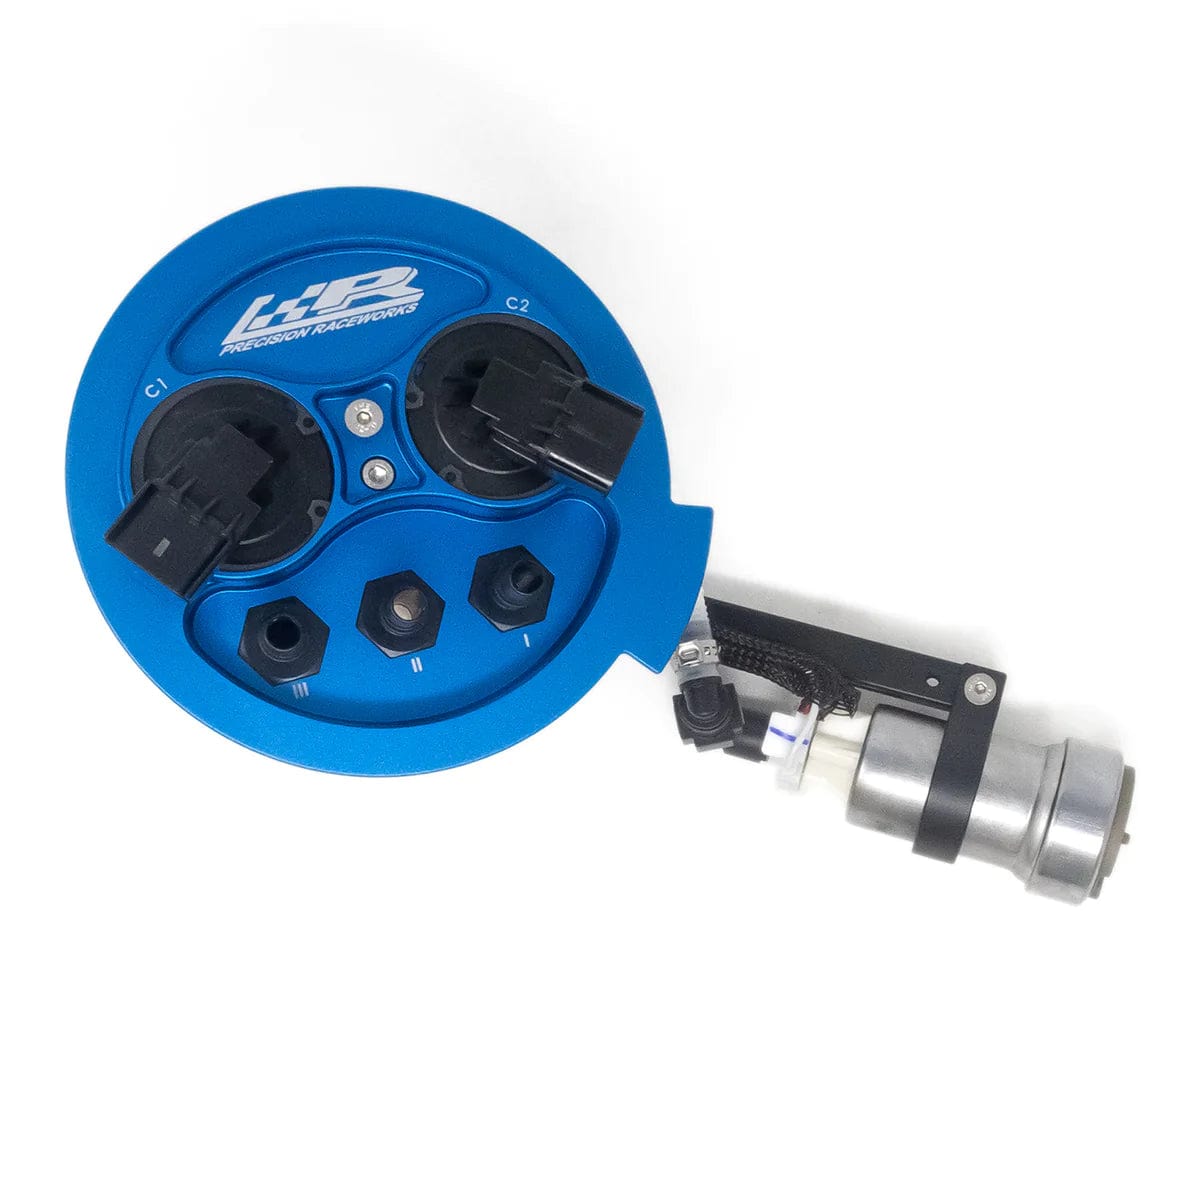 Kies-Motorsports Precision Raceworks Precision Racewerks G8x/G2x Stand Alone Auxiliary Fuel System AFS.640